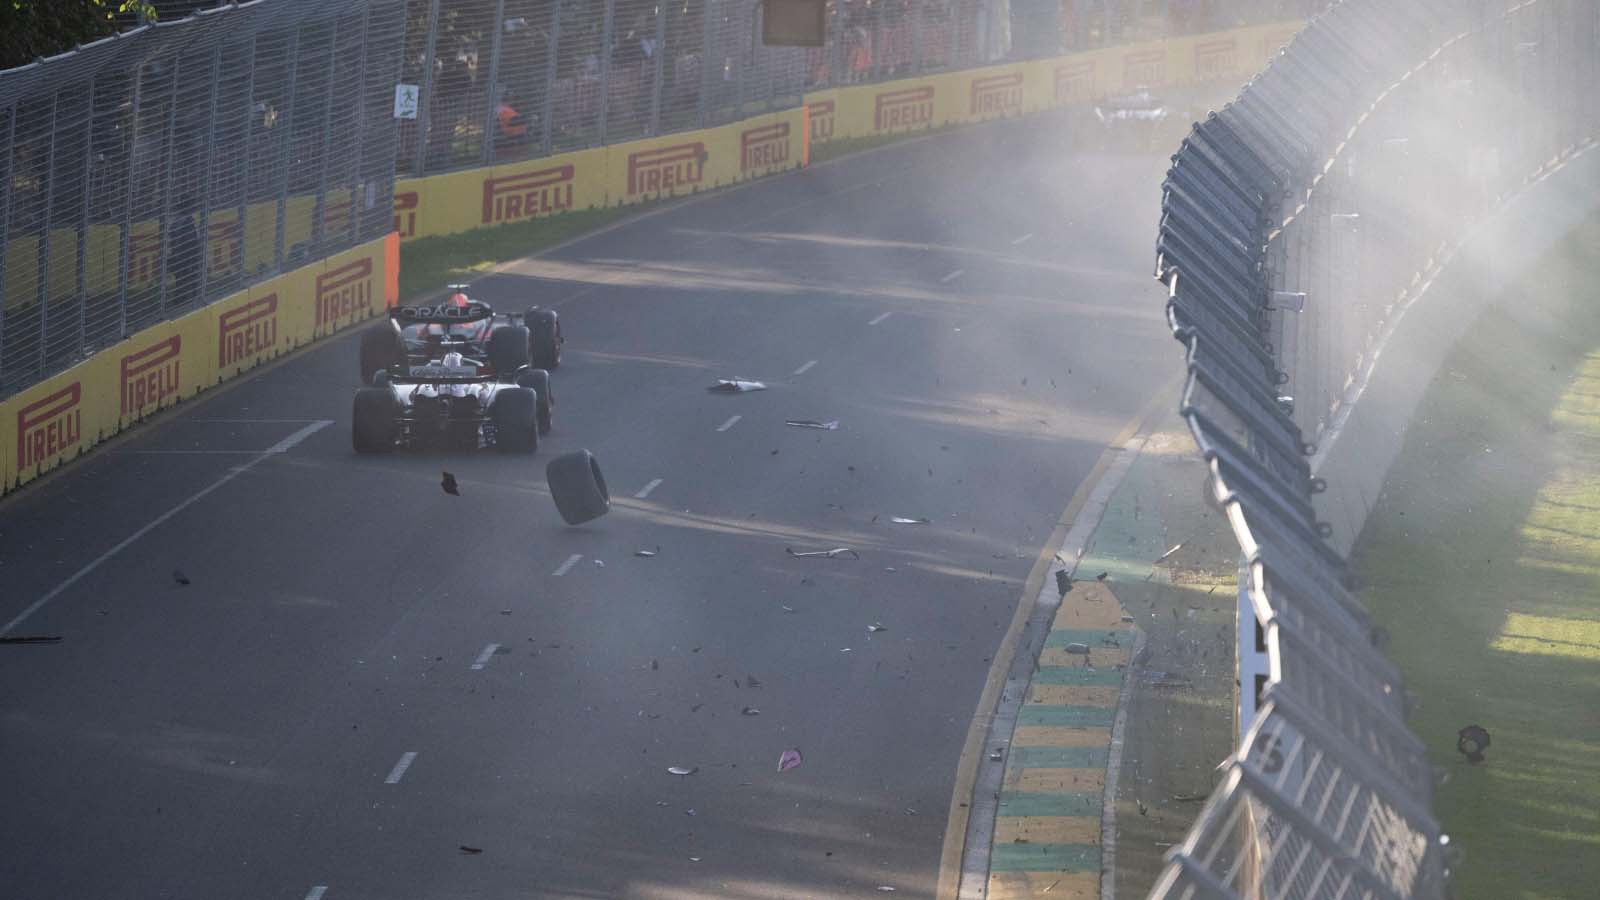 Smoke fills the air after an accident at the restart. Australian GP Melbourne April 2023.